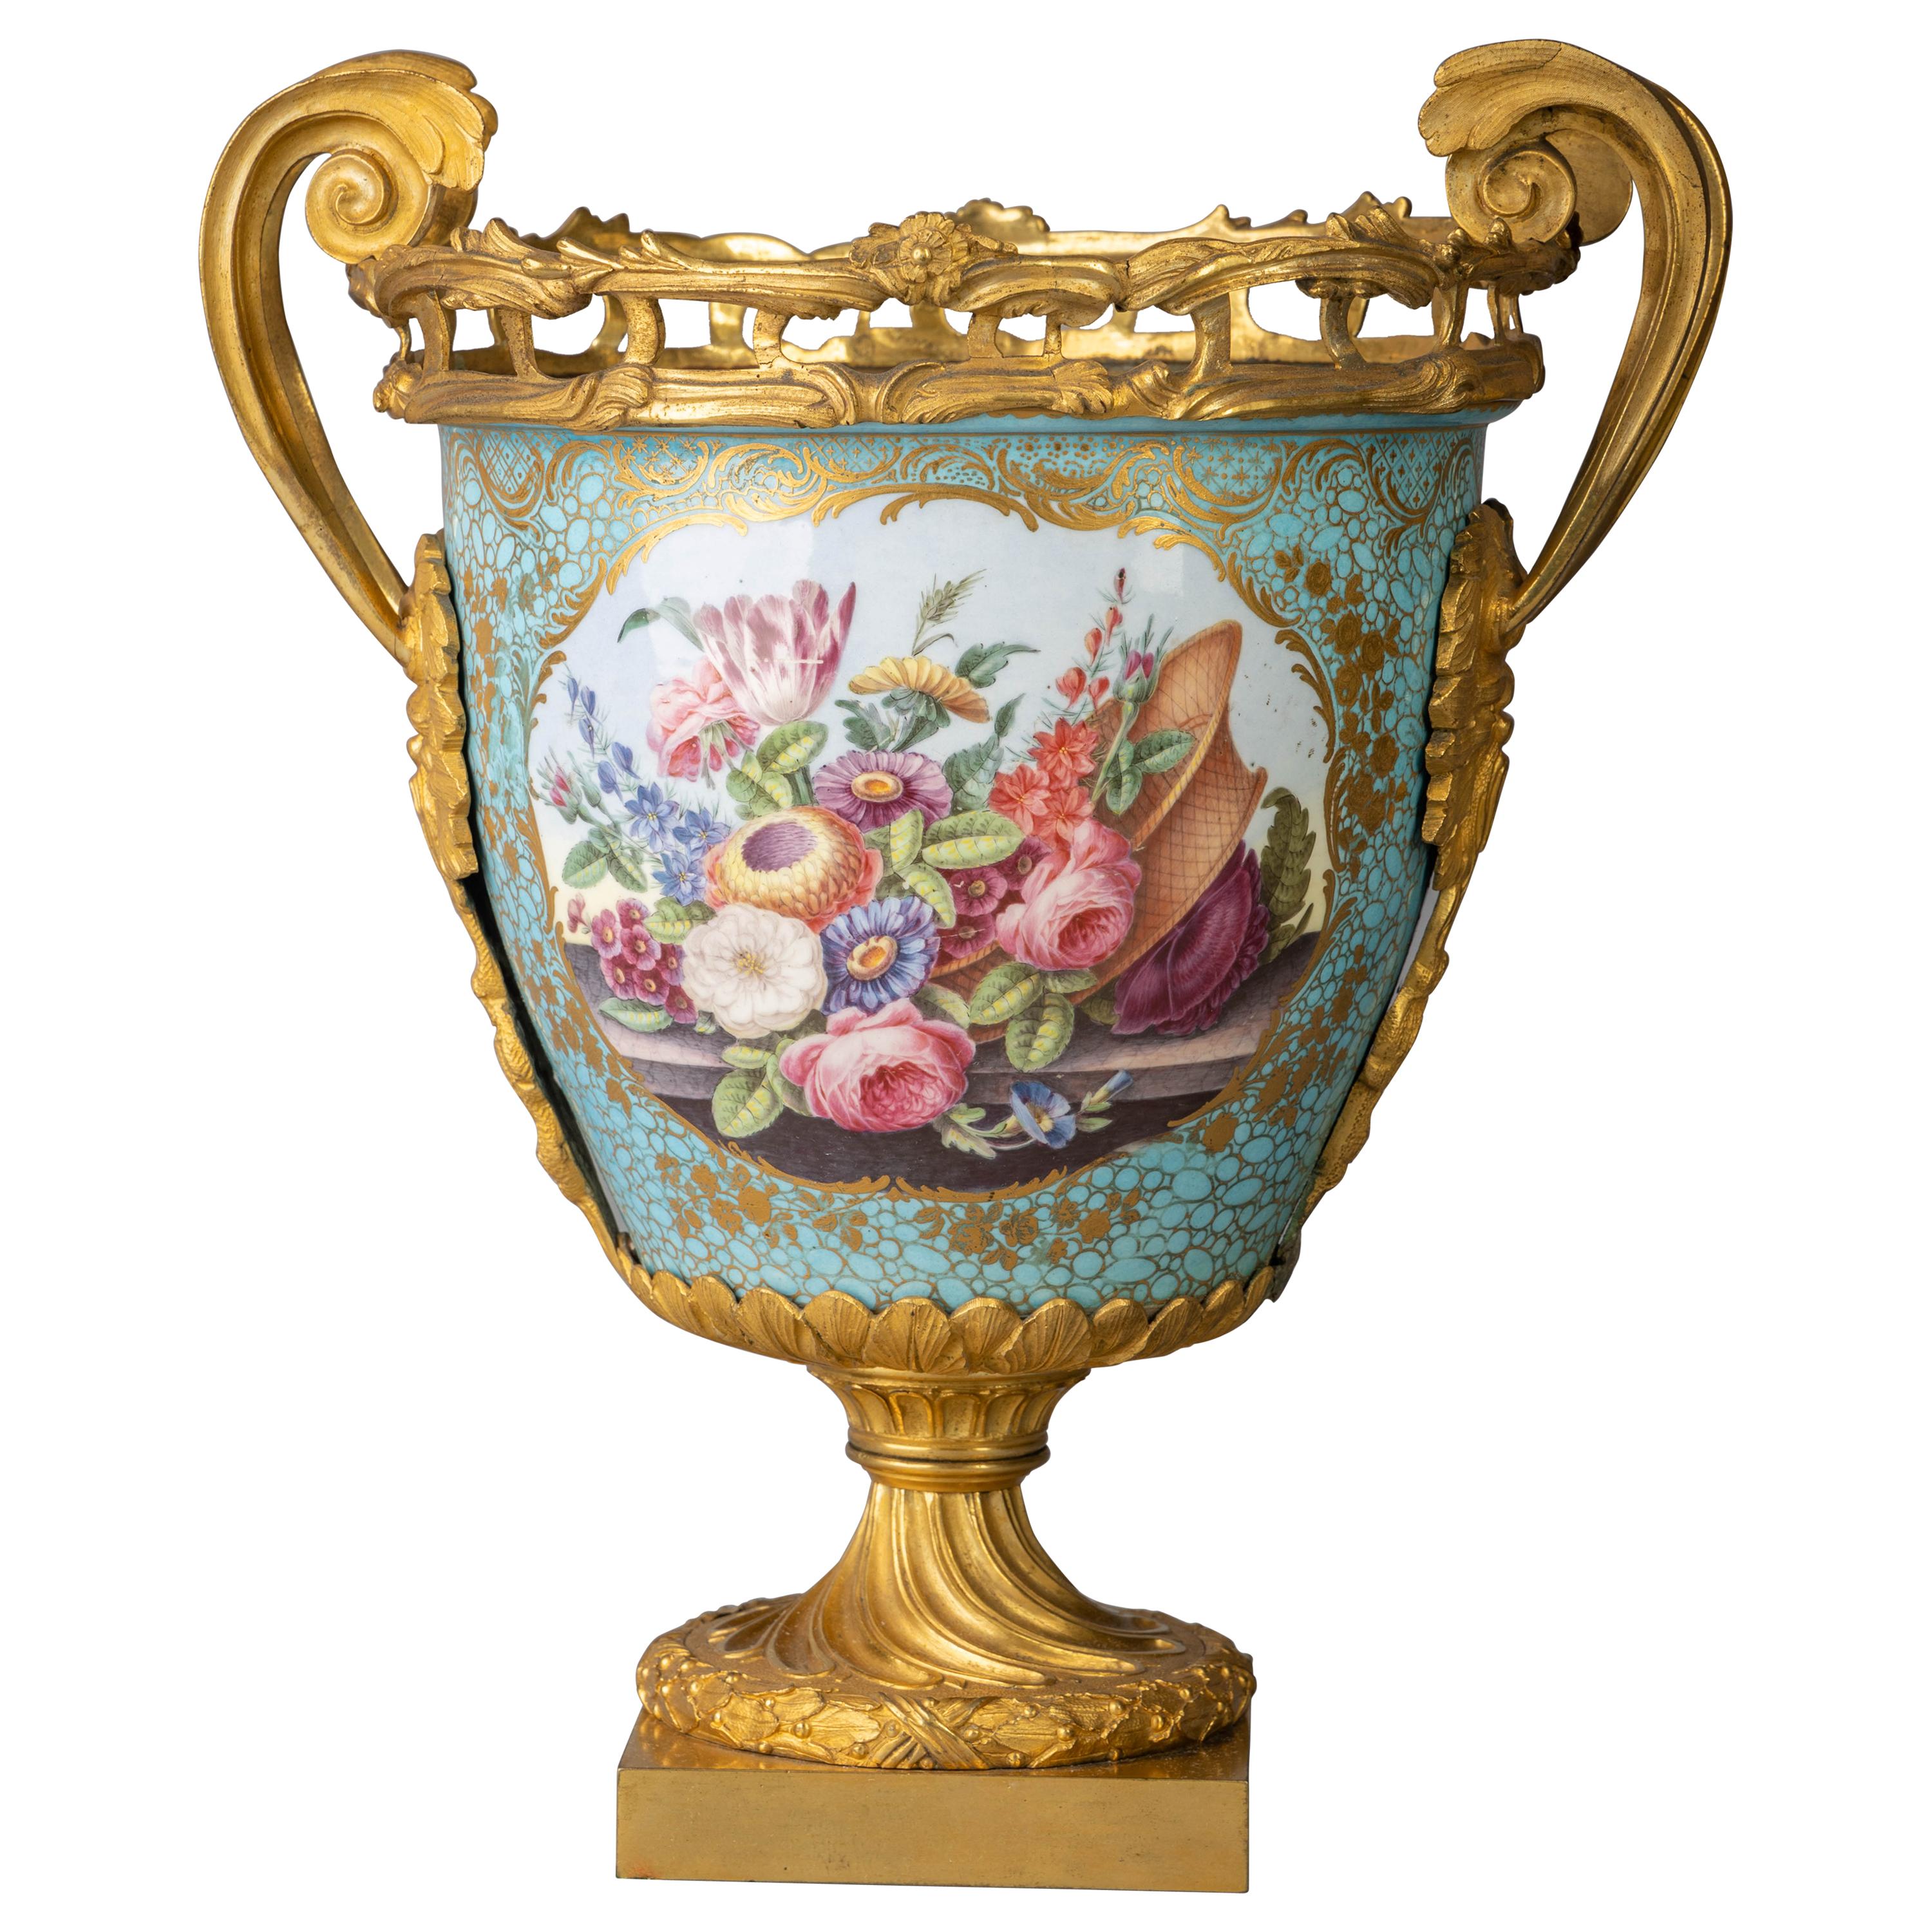 French Gilt Bronze and Porcelain Two-Handled Centerpiece Vase, circa 1875